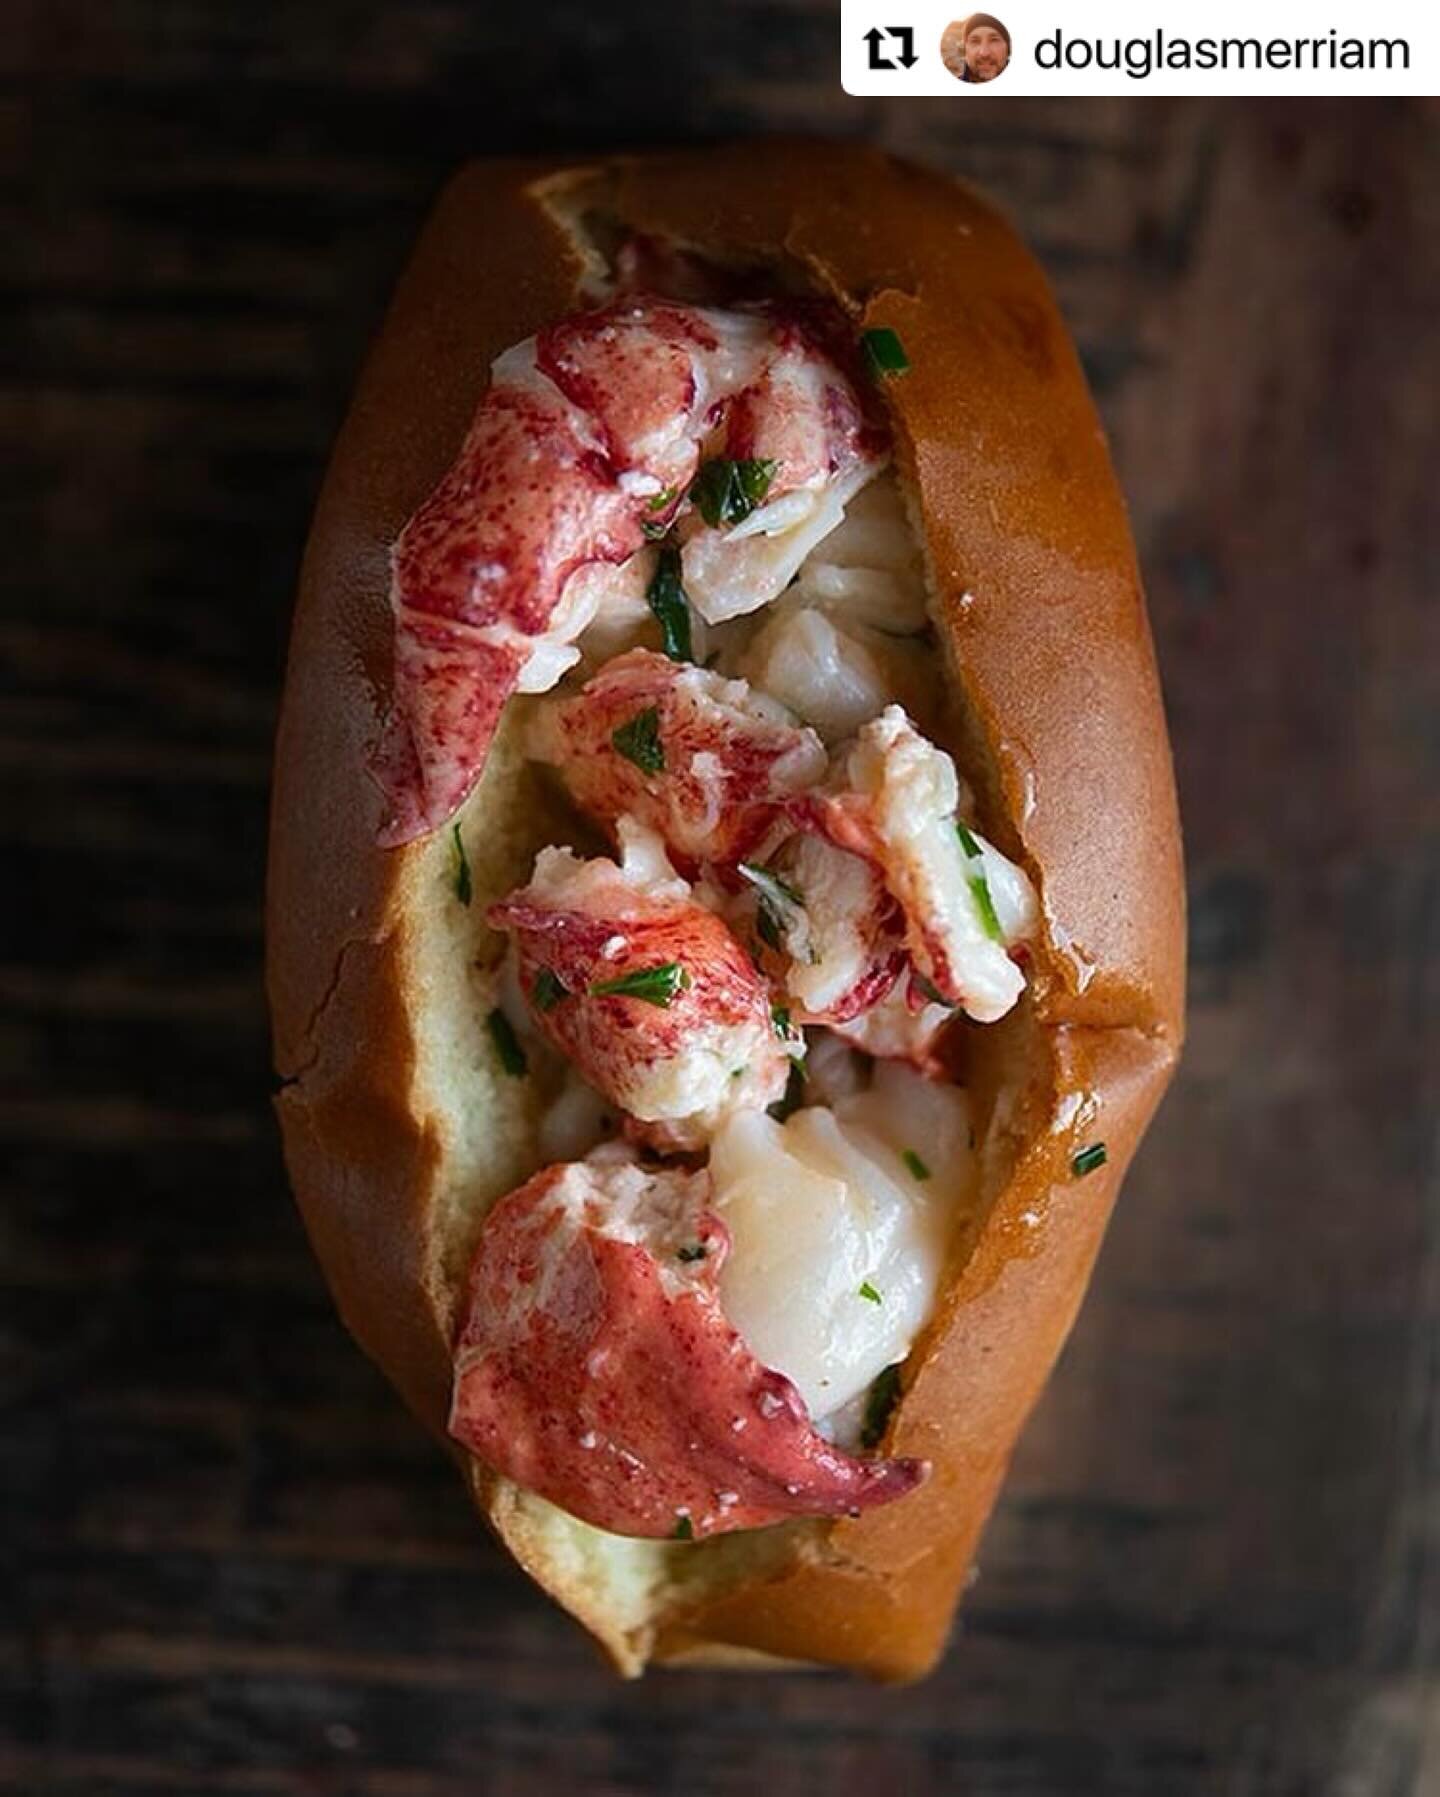 #Repost @douglasmerriam with @use.repost
・・・
Thank you @dakotalovesbonemarrow and @capitalcoalneighborhoodeatery for giving me a piece of home tonight. You&rsquo;re authentic Maine Lobster Roll (yes fresh Maine lobster) on a buttered toasted brioche 